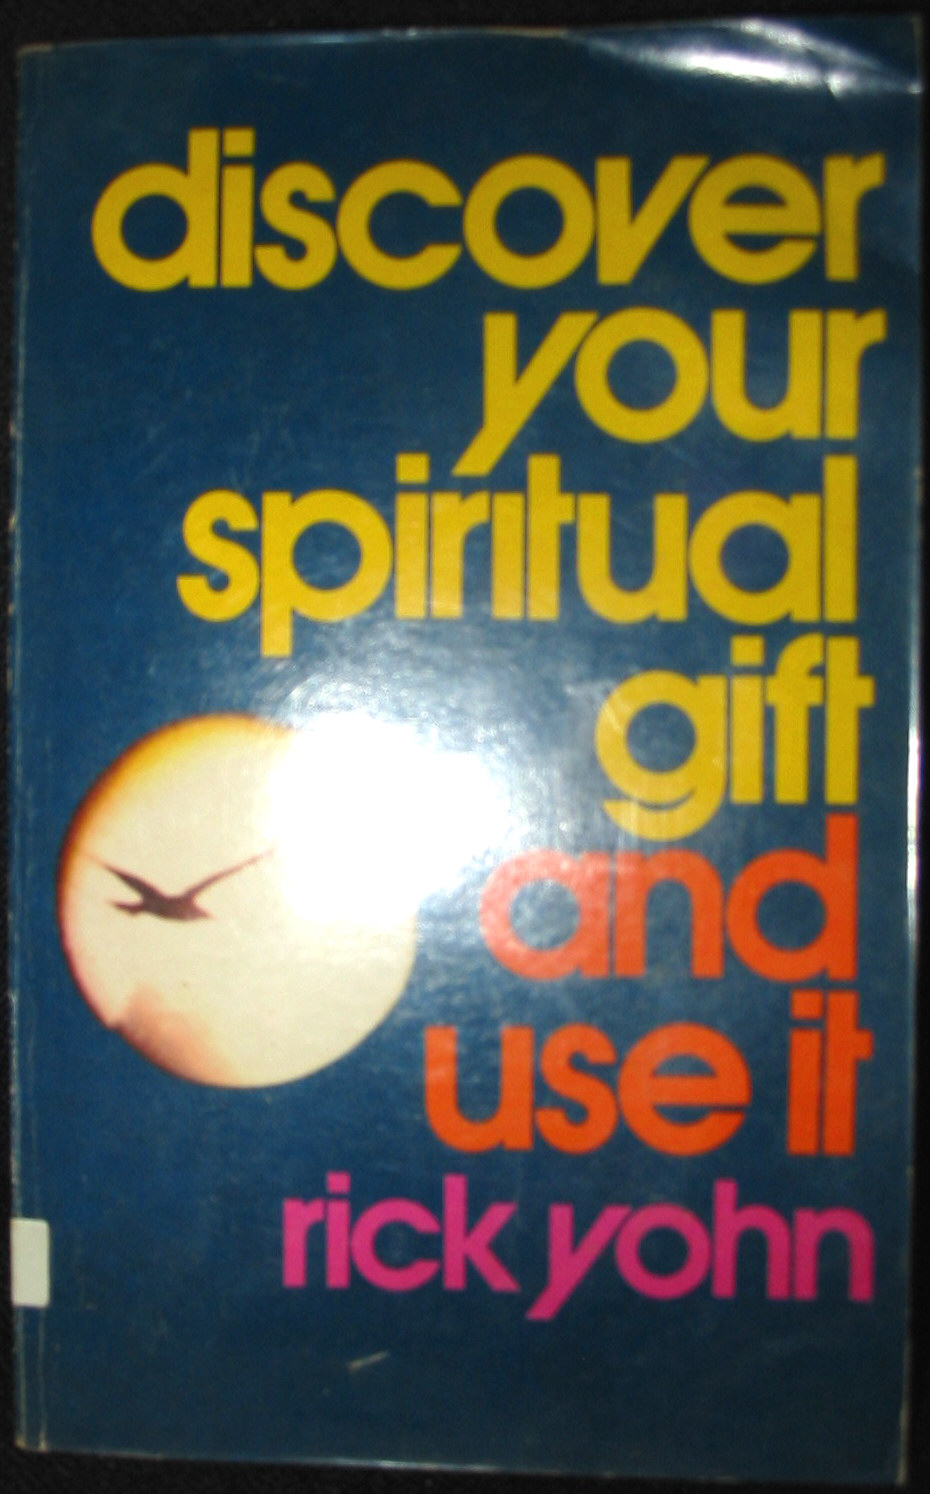 [Discover+your+spiritual+gift+and+use+it.jpg]